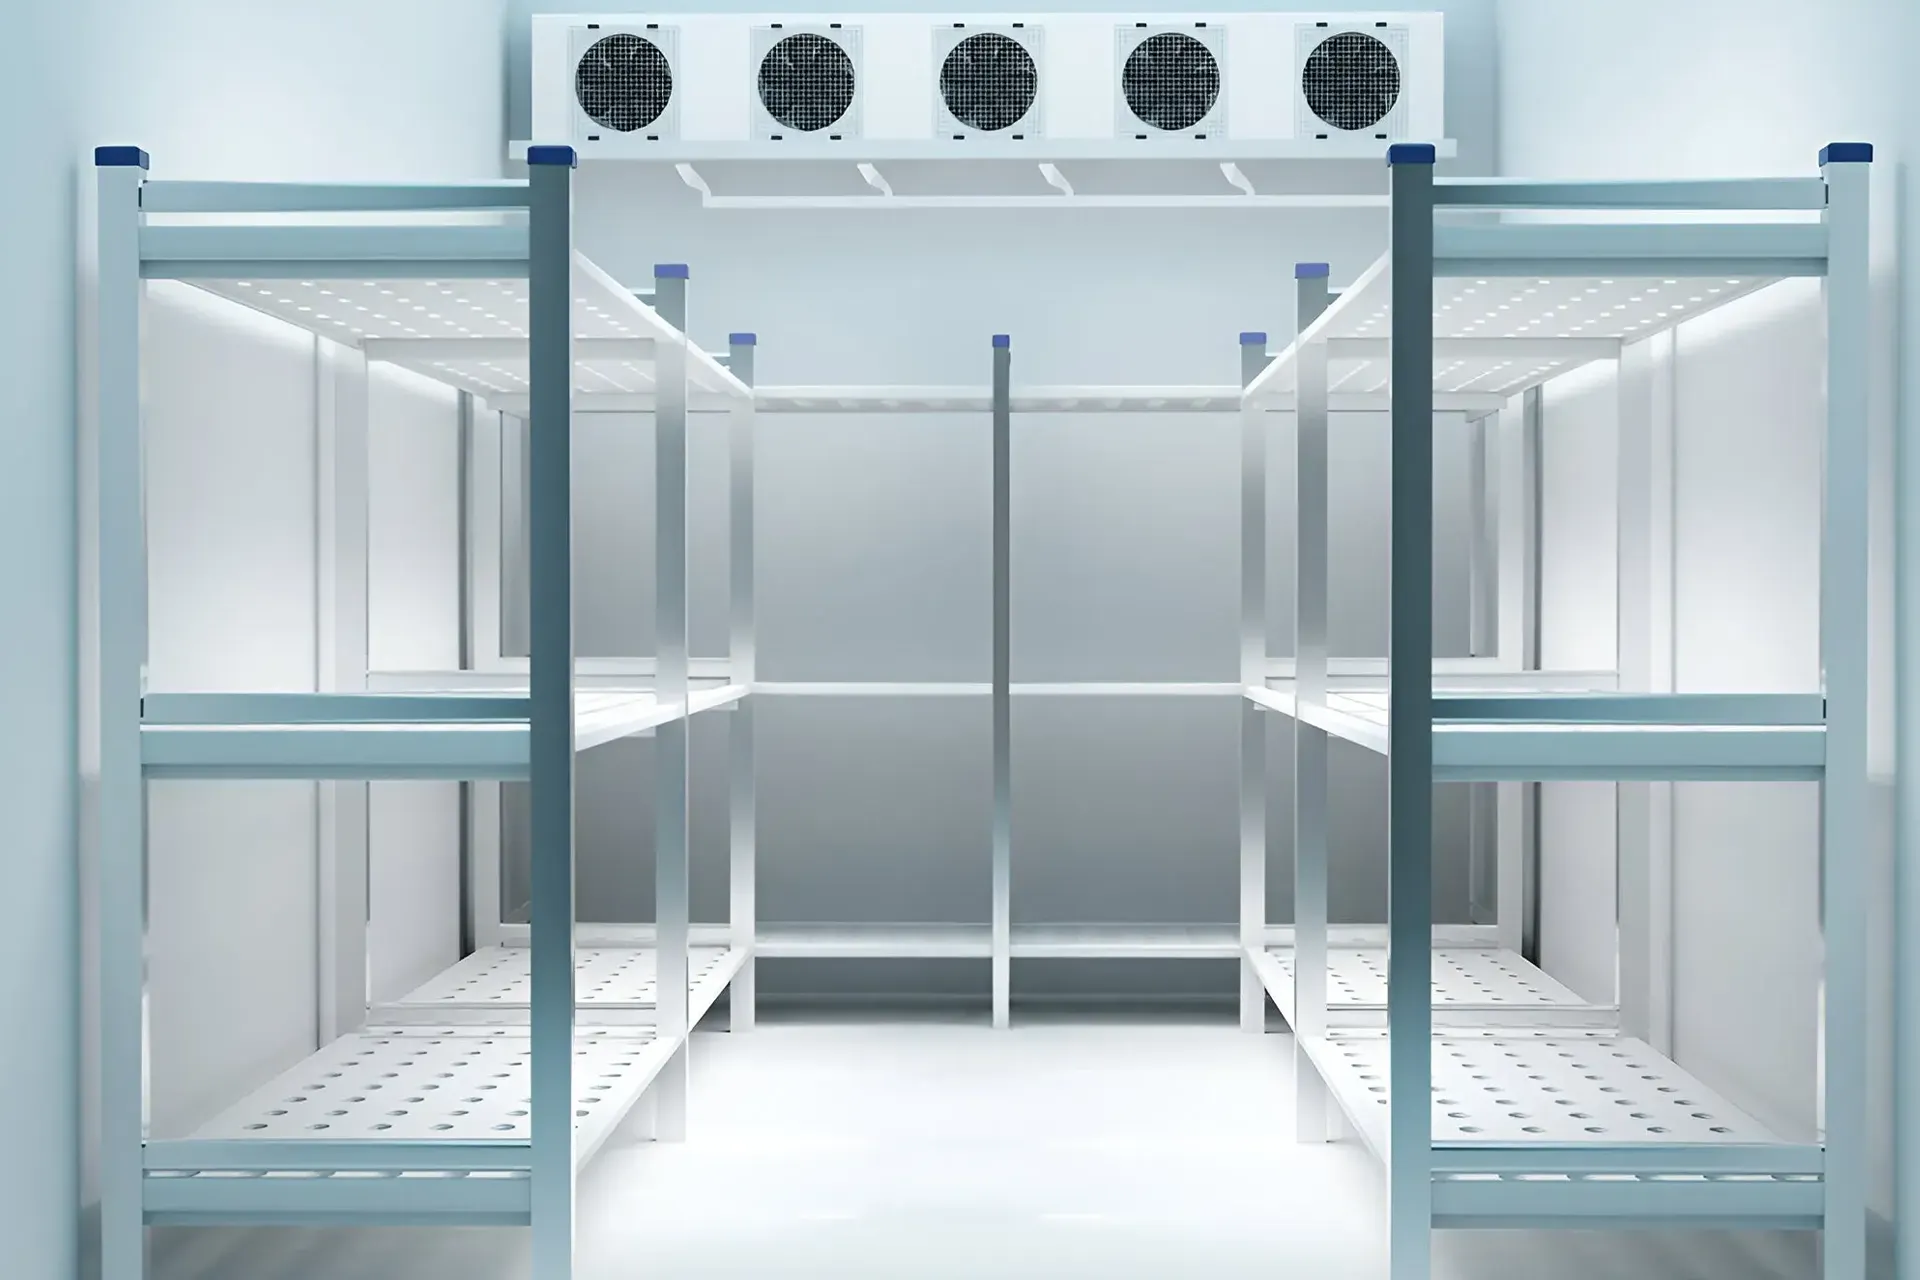 Our cold room manufacturing service is designed to provide customized and efficient cold storage solutions for a wide range of industries, including restaurants, hotels, and nursing homes. From food and beverages to pharmaceuticals and chemicals, our cold rooms are designed to meet the highest standards of quality and performance.